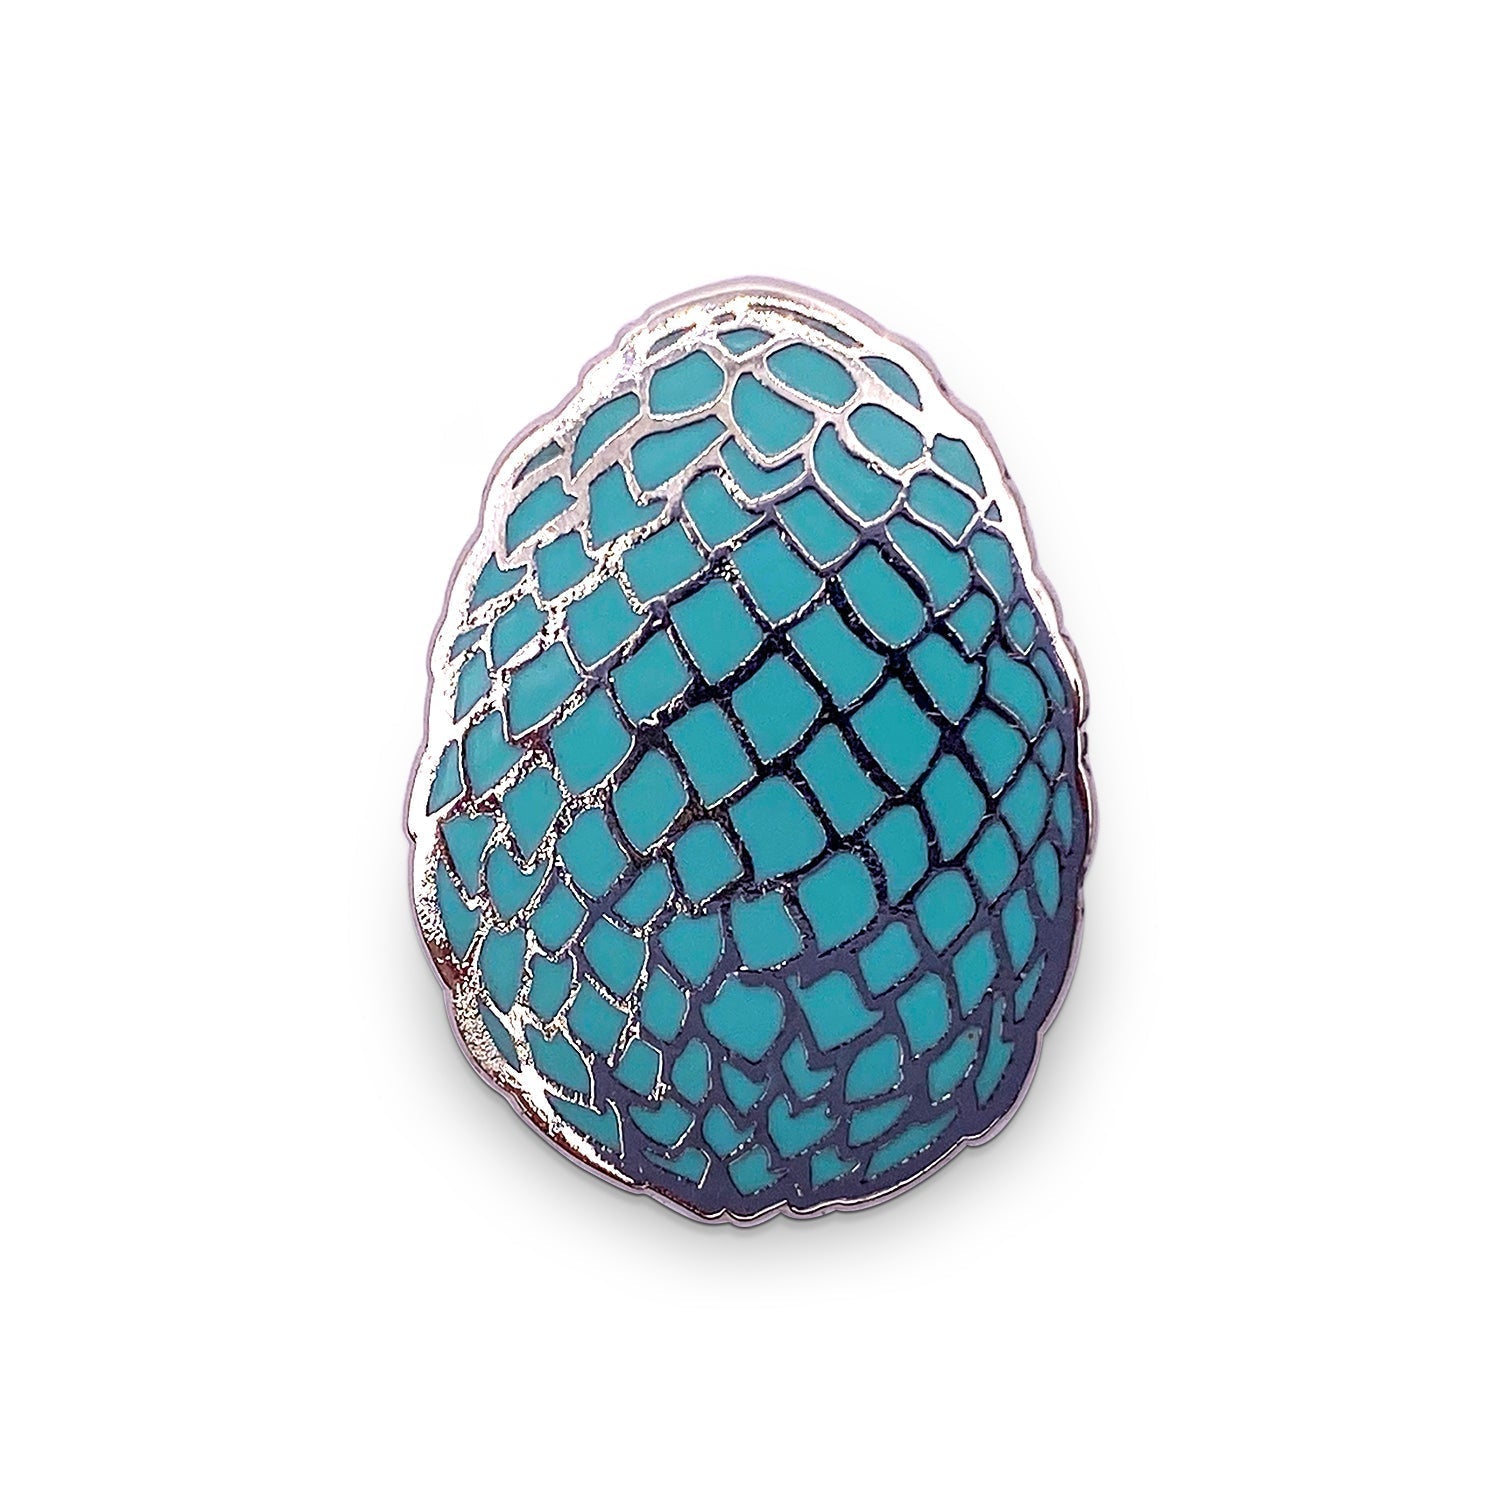 Dragon Egg - Hard Enamel Adventure Pin Metal by Norse Foundry - 02411866_Parent